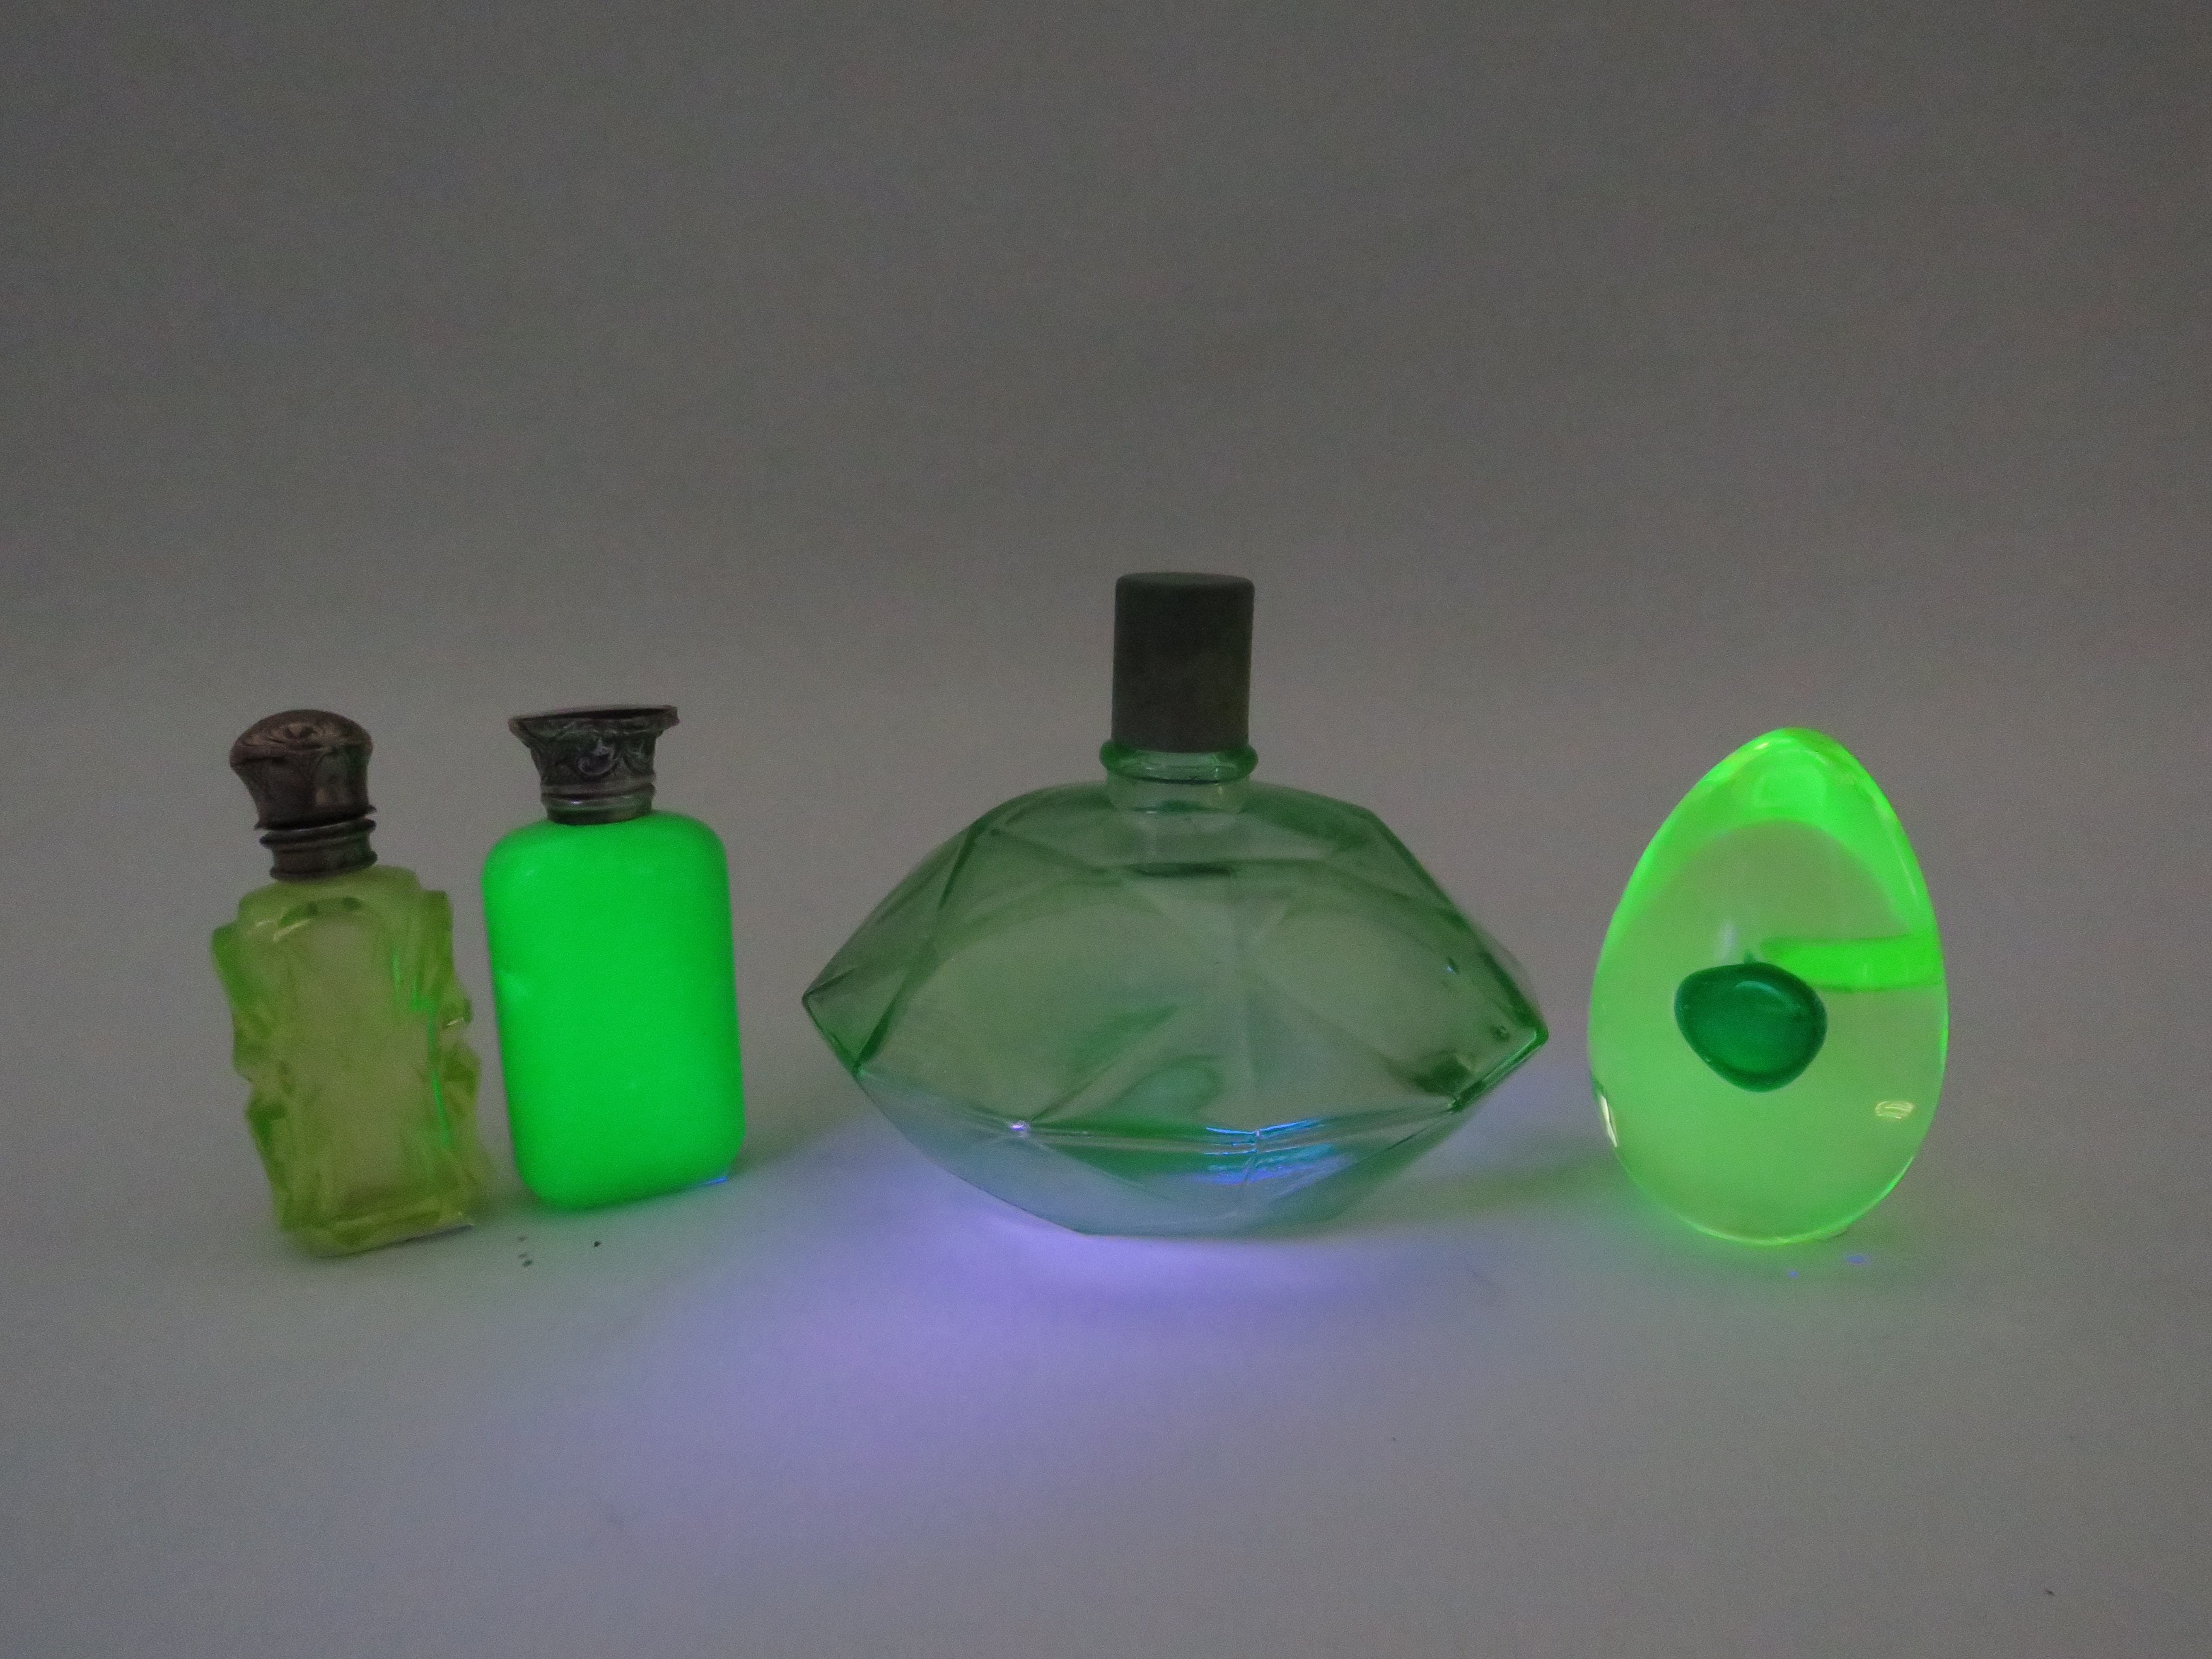 3 Uranium glass scent bottles and a paperweight by Murano.